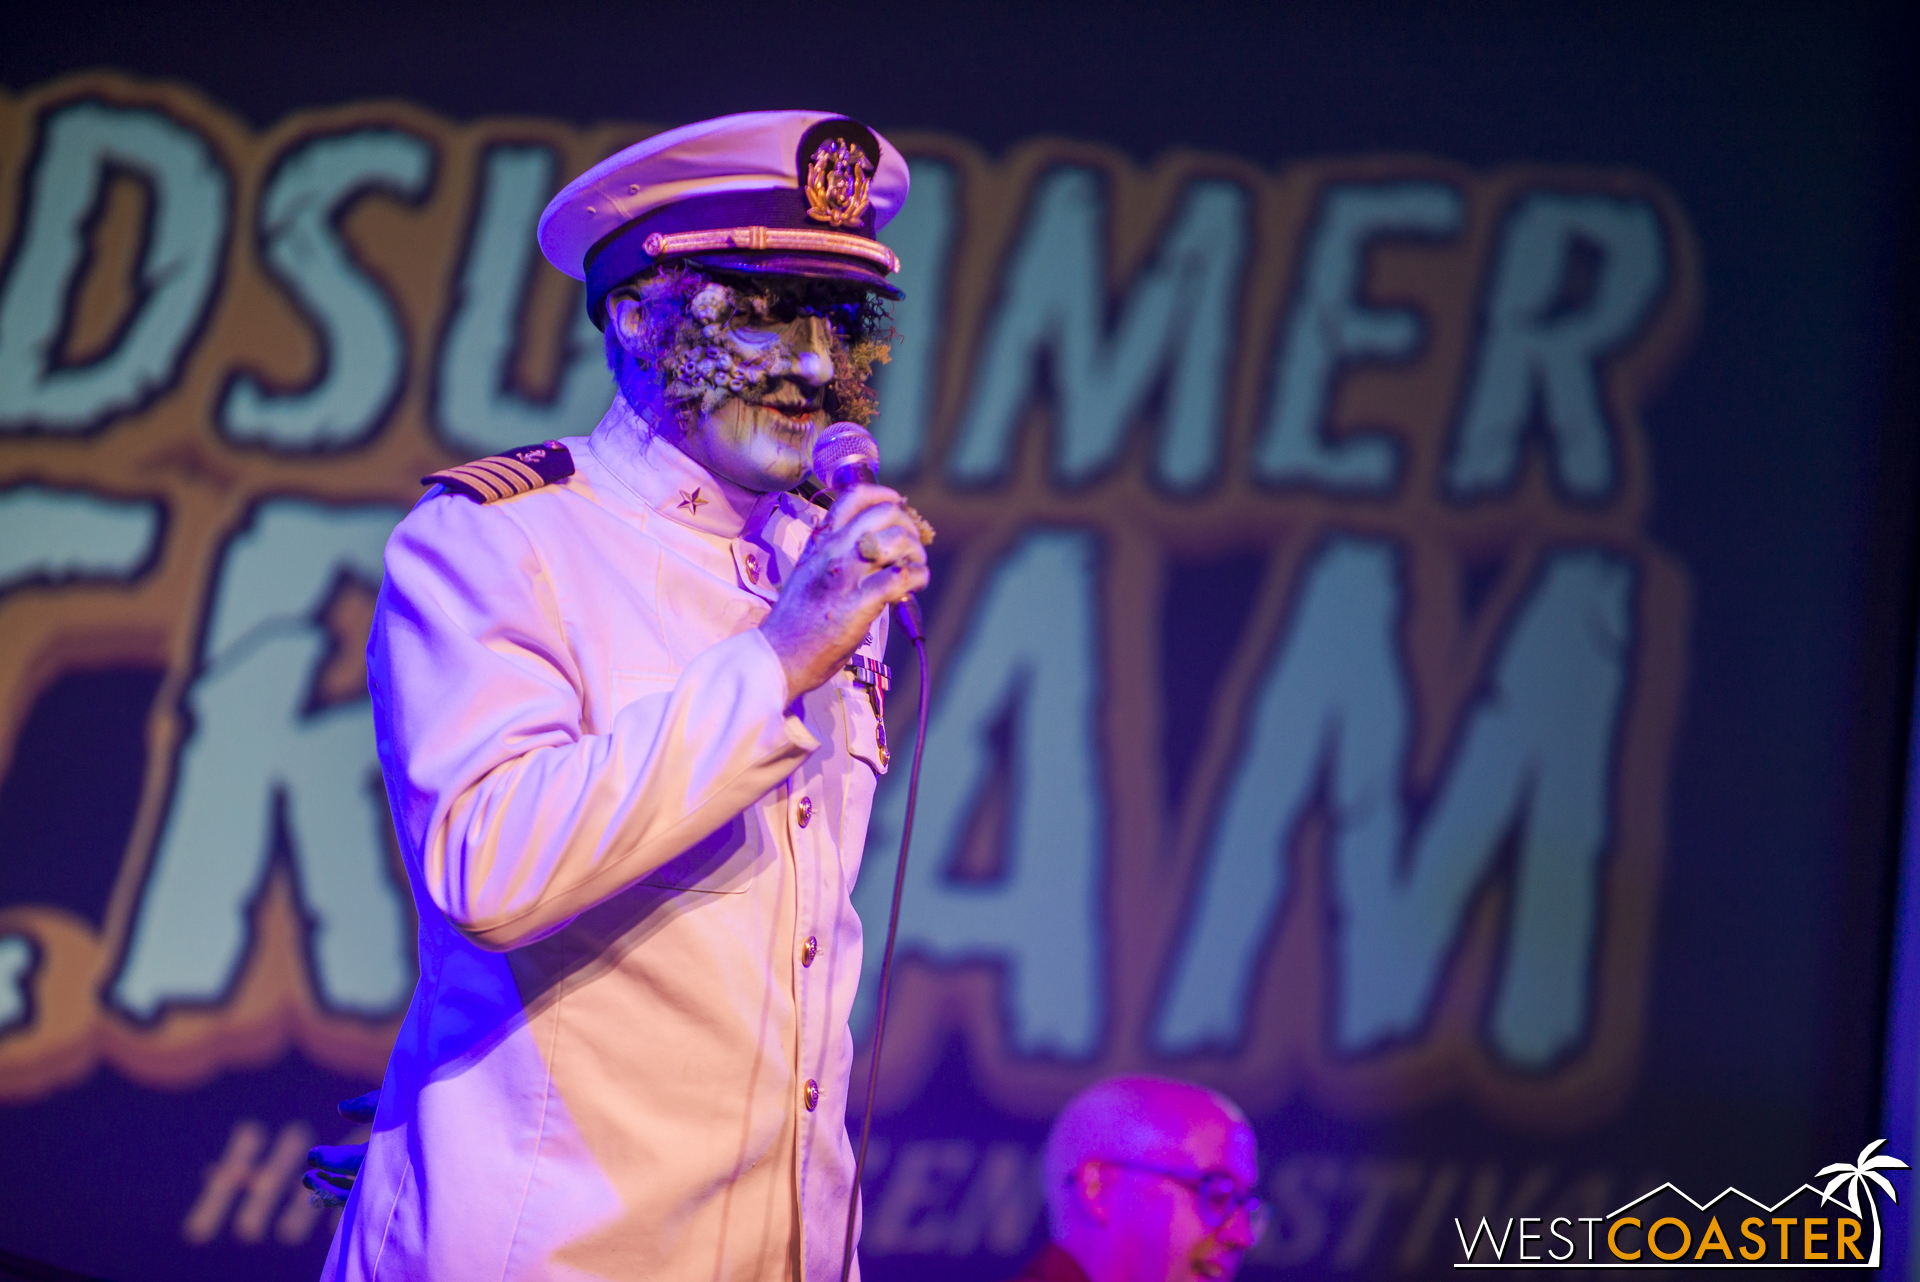  Then they were joined by The Captain, playing the role of emcee that The Ringmaster so entertainingly performed last year at Scare L.A. 